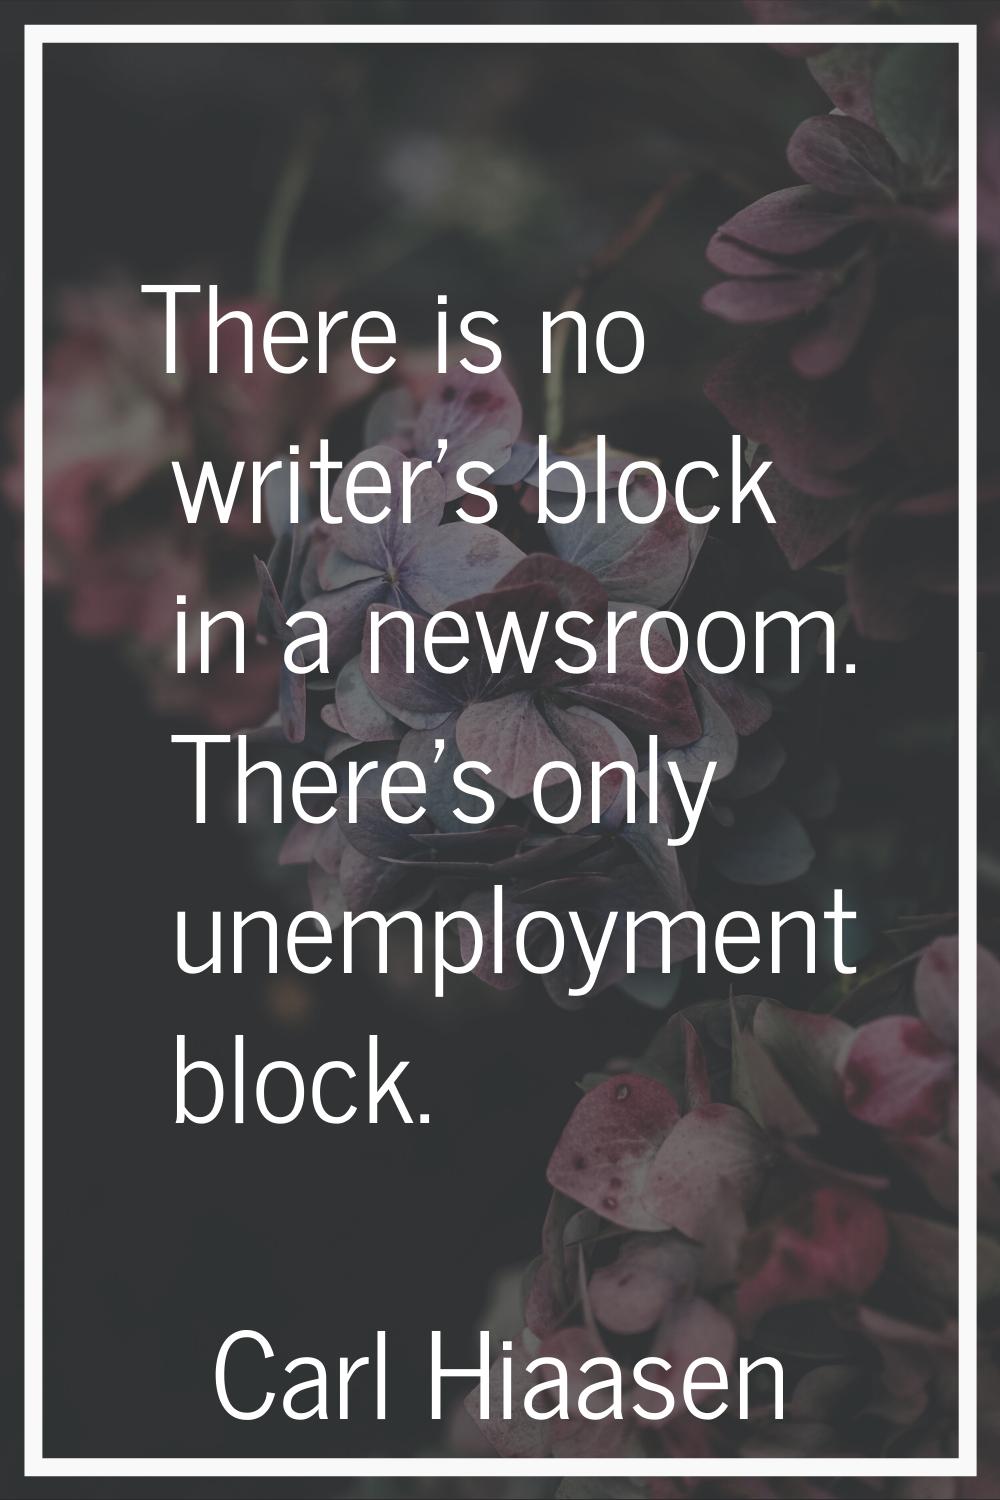 There is no writer's block in a newsroom. There's only unemployment block.